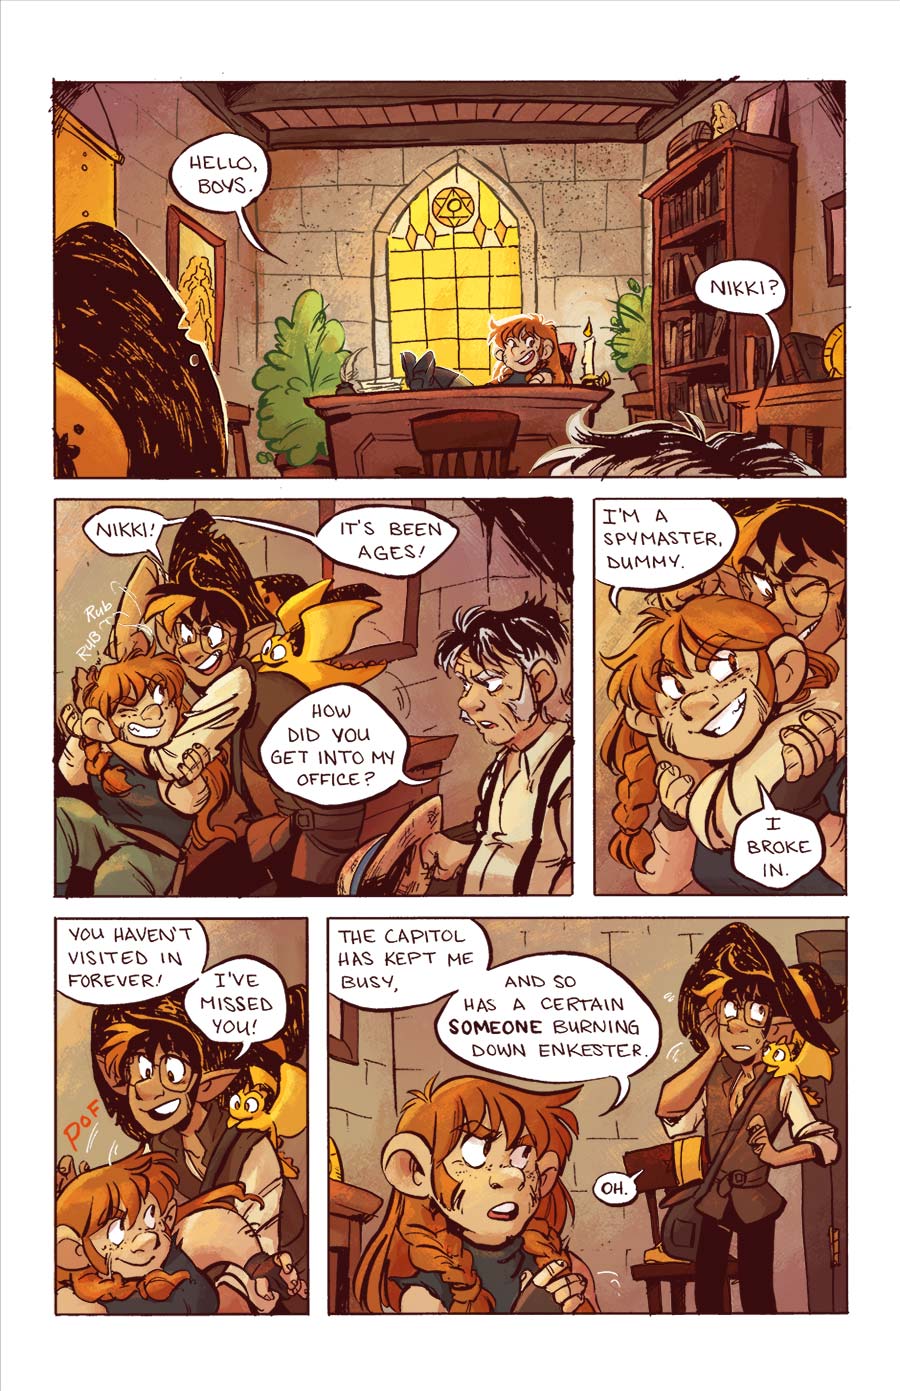 Fitting Toivo and Nikki in the same panel is very challenging.